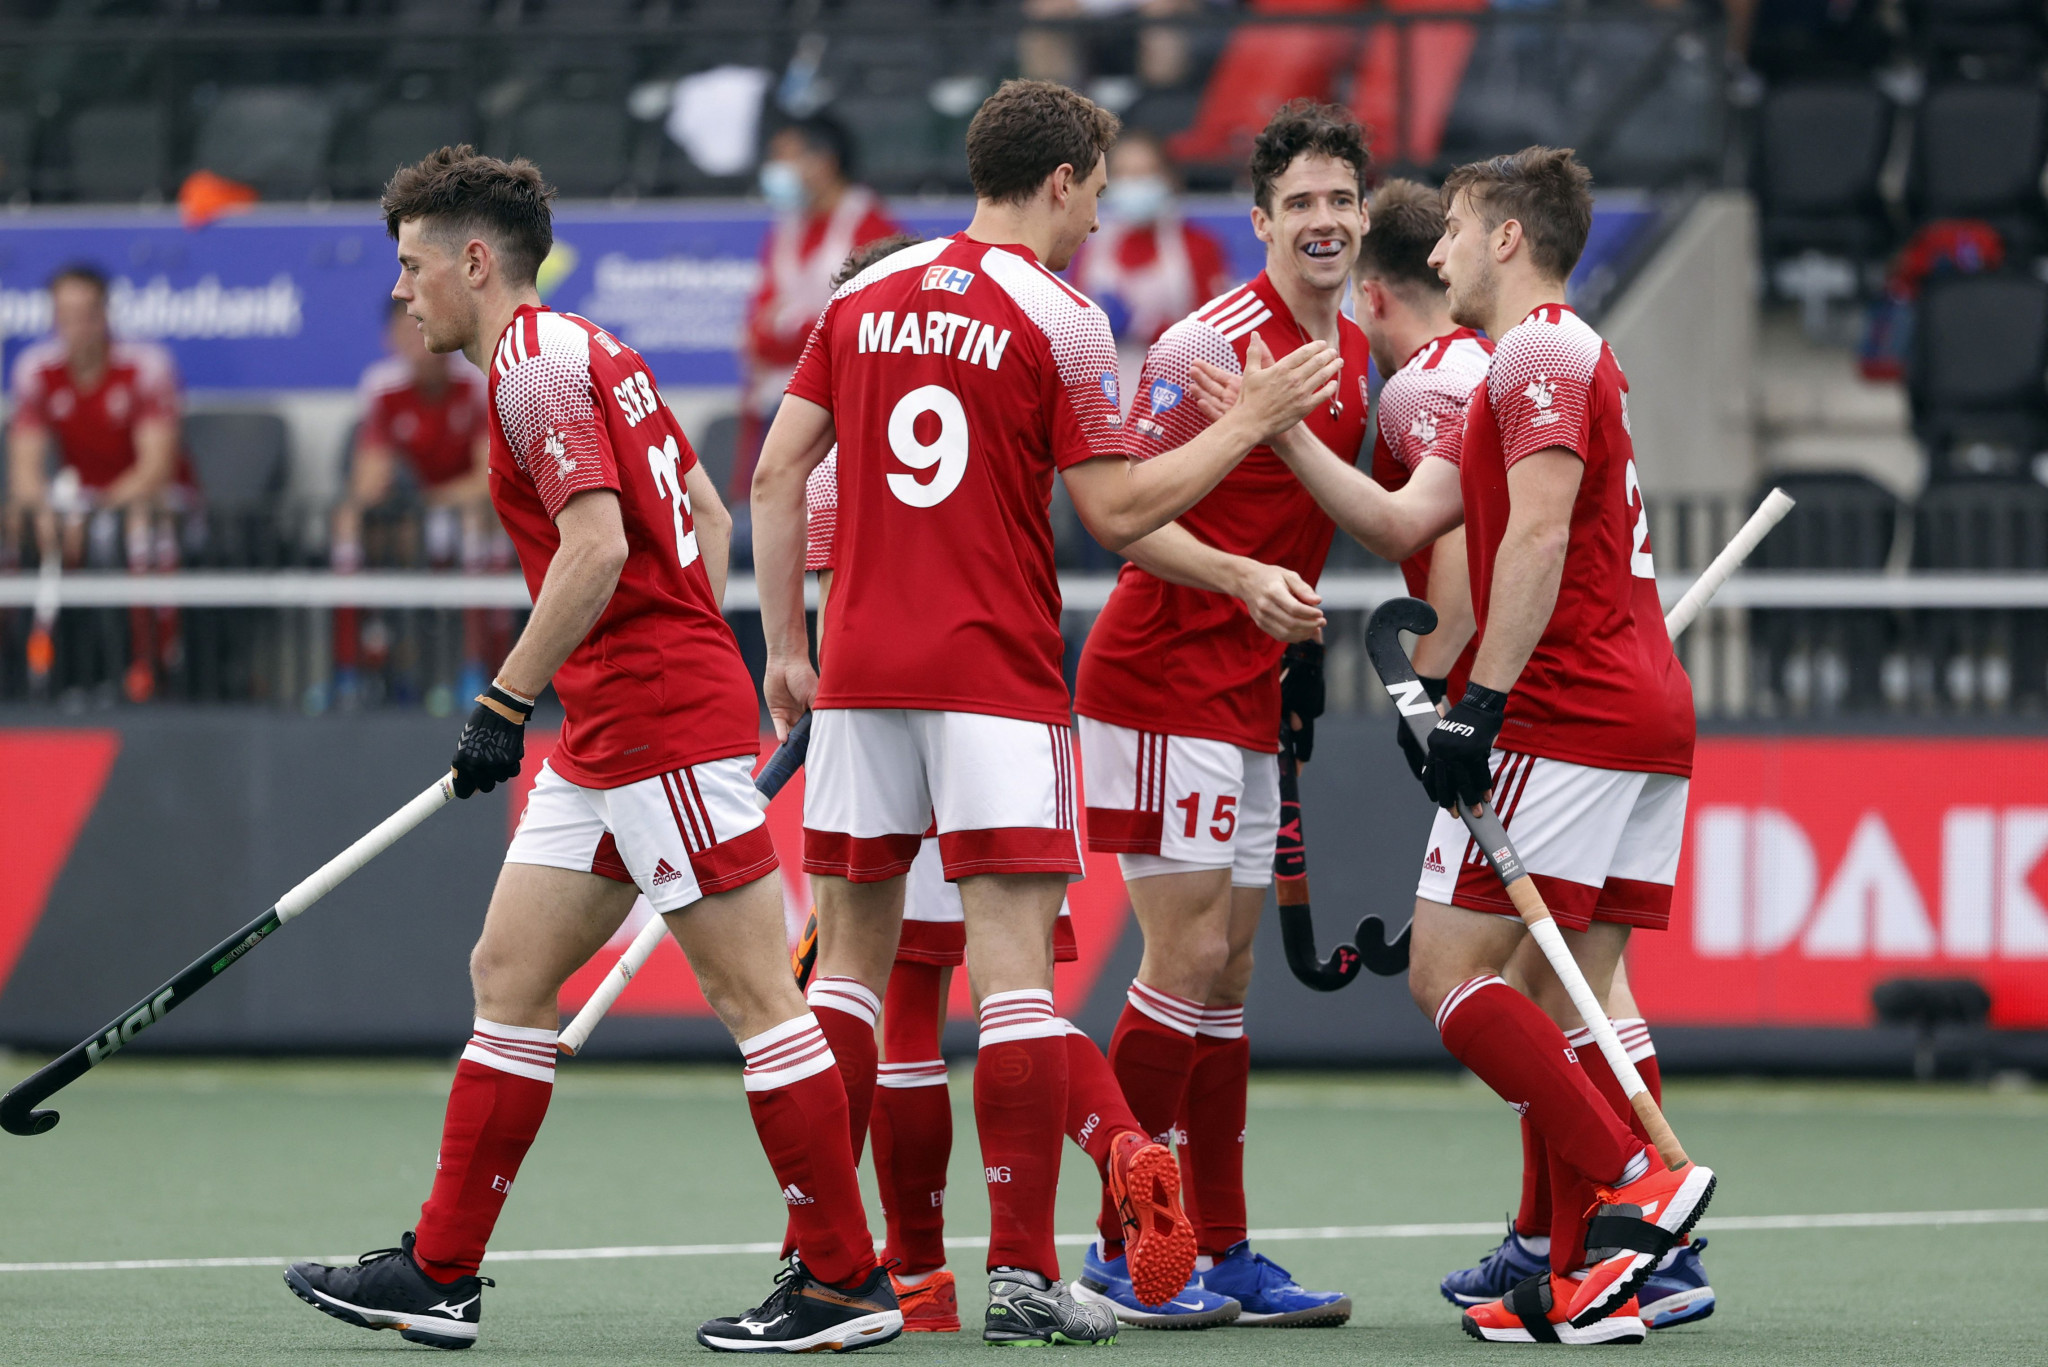 England's men have now won three consecutive matches in the FIH Pro League ©Getty Images